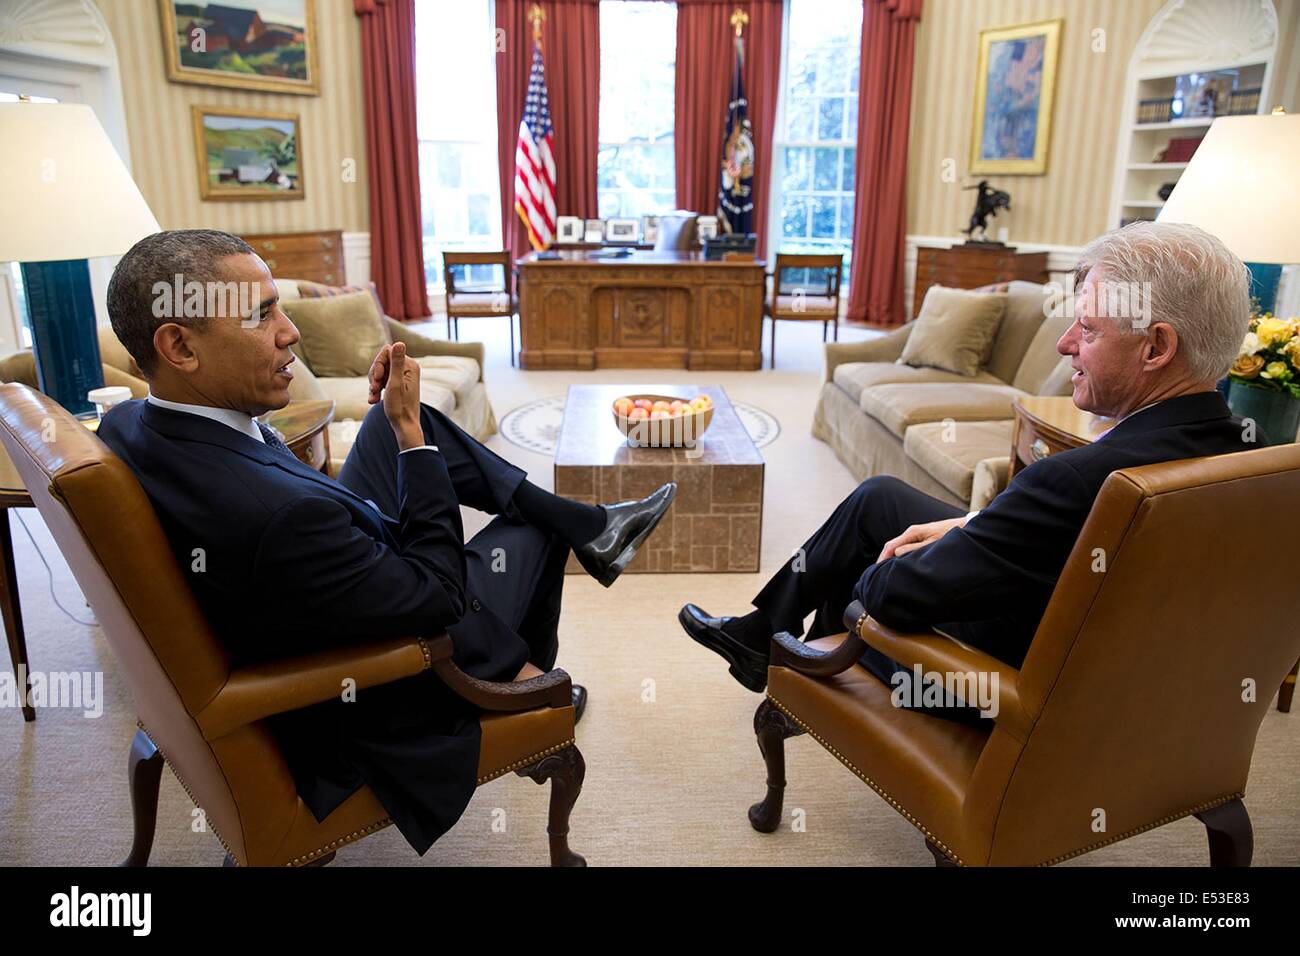 US President Barack Obama meets with former President Bill Clinton in the Oval Office of the White House May 1, 2014 in Washington, DC. Stock Photo